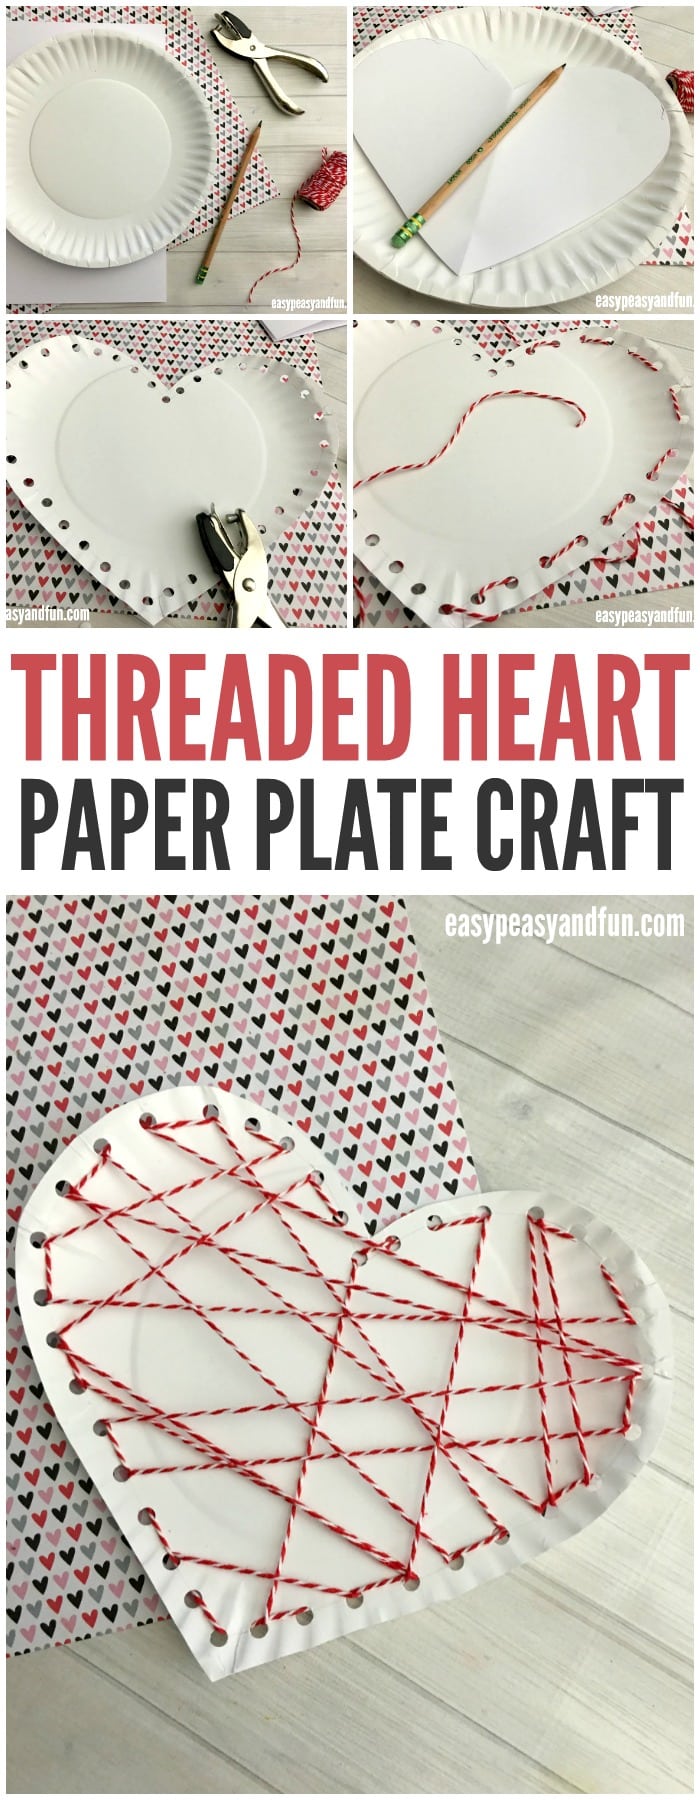 Heart-shaped paper plate craft for kids